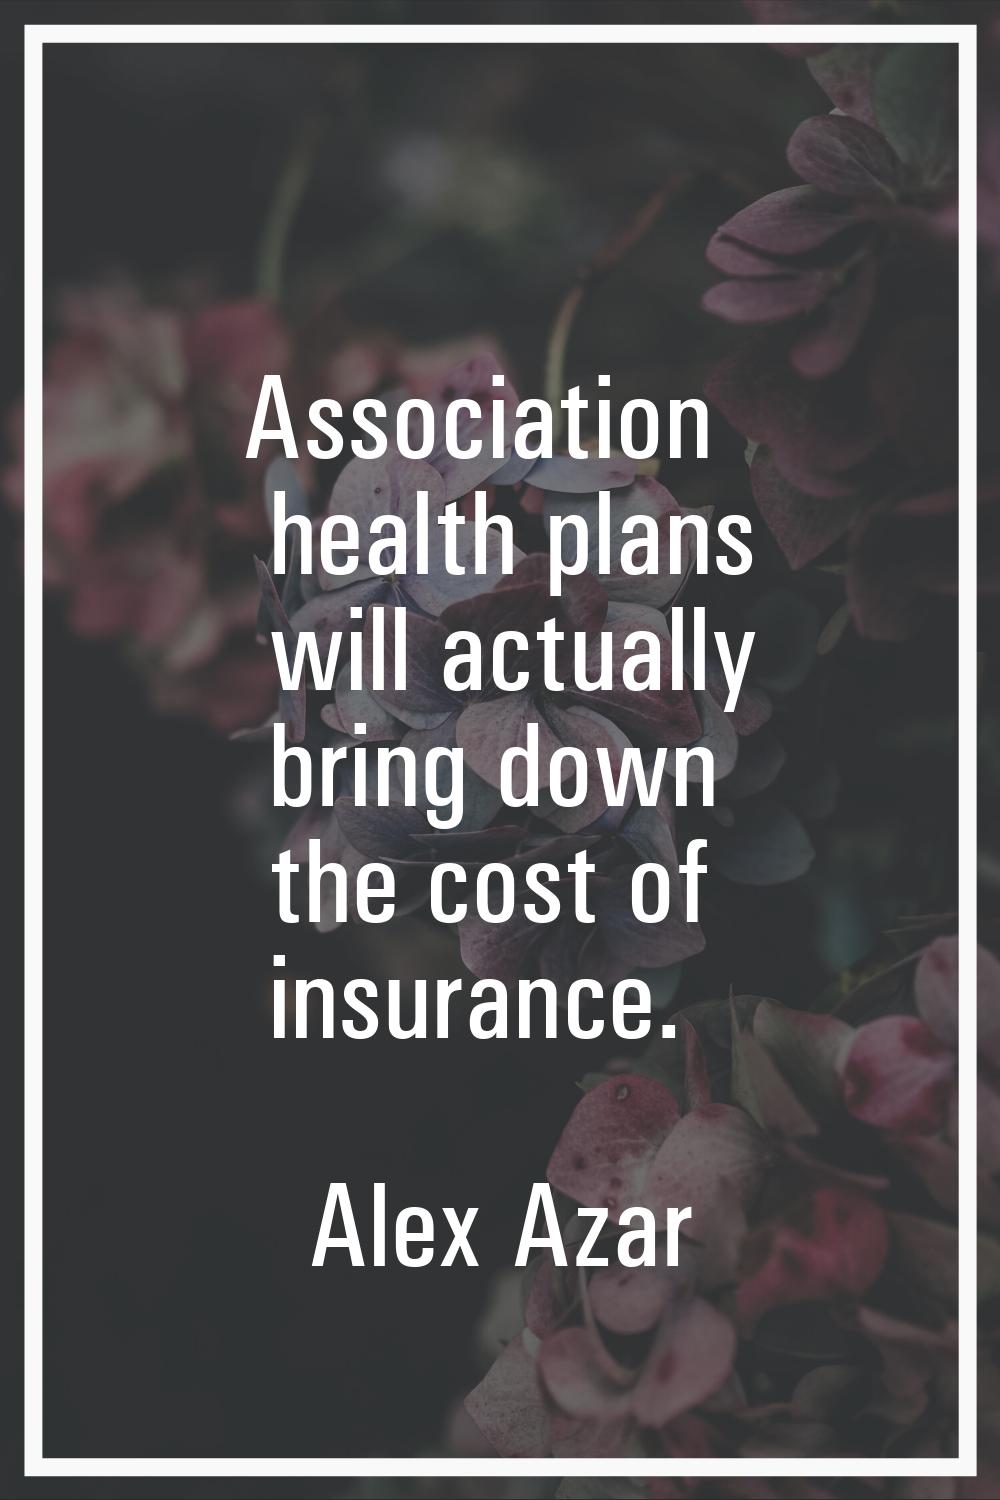 Association health plans will actually bring down the cost of insurance.